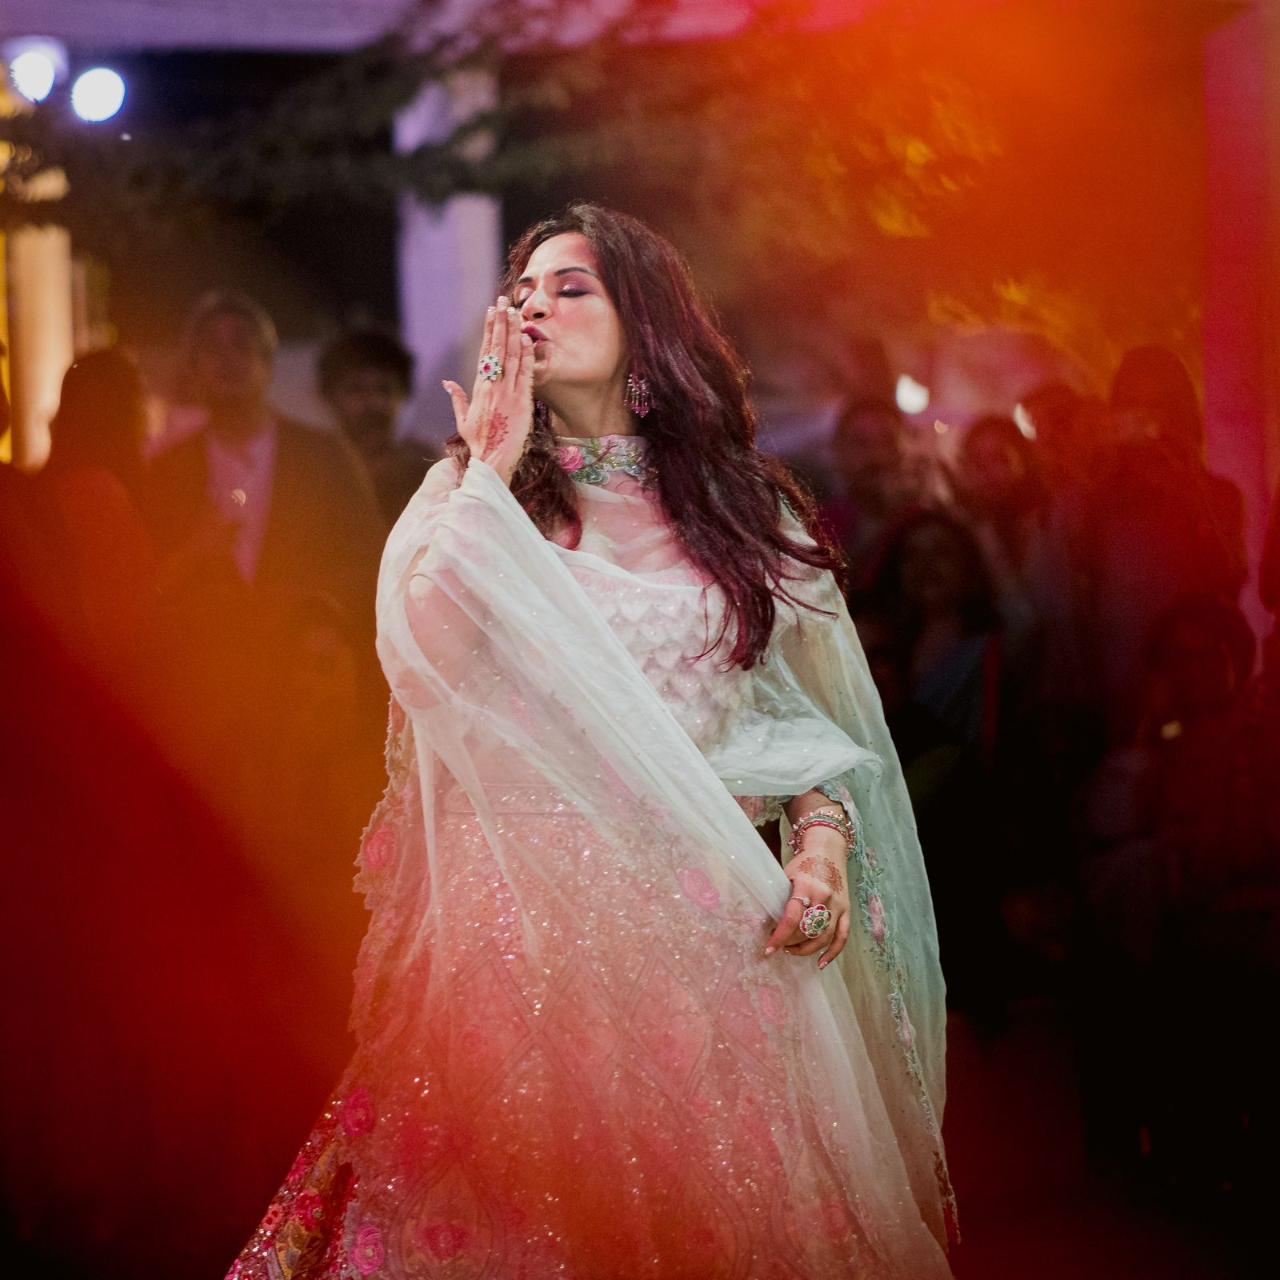 
The mehendi and sangeet were held at Richa’s friend's home's sprawling lawns. The place has a value of nostalgia as it’s close to where she studied
